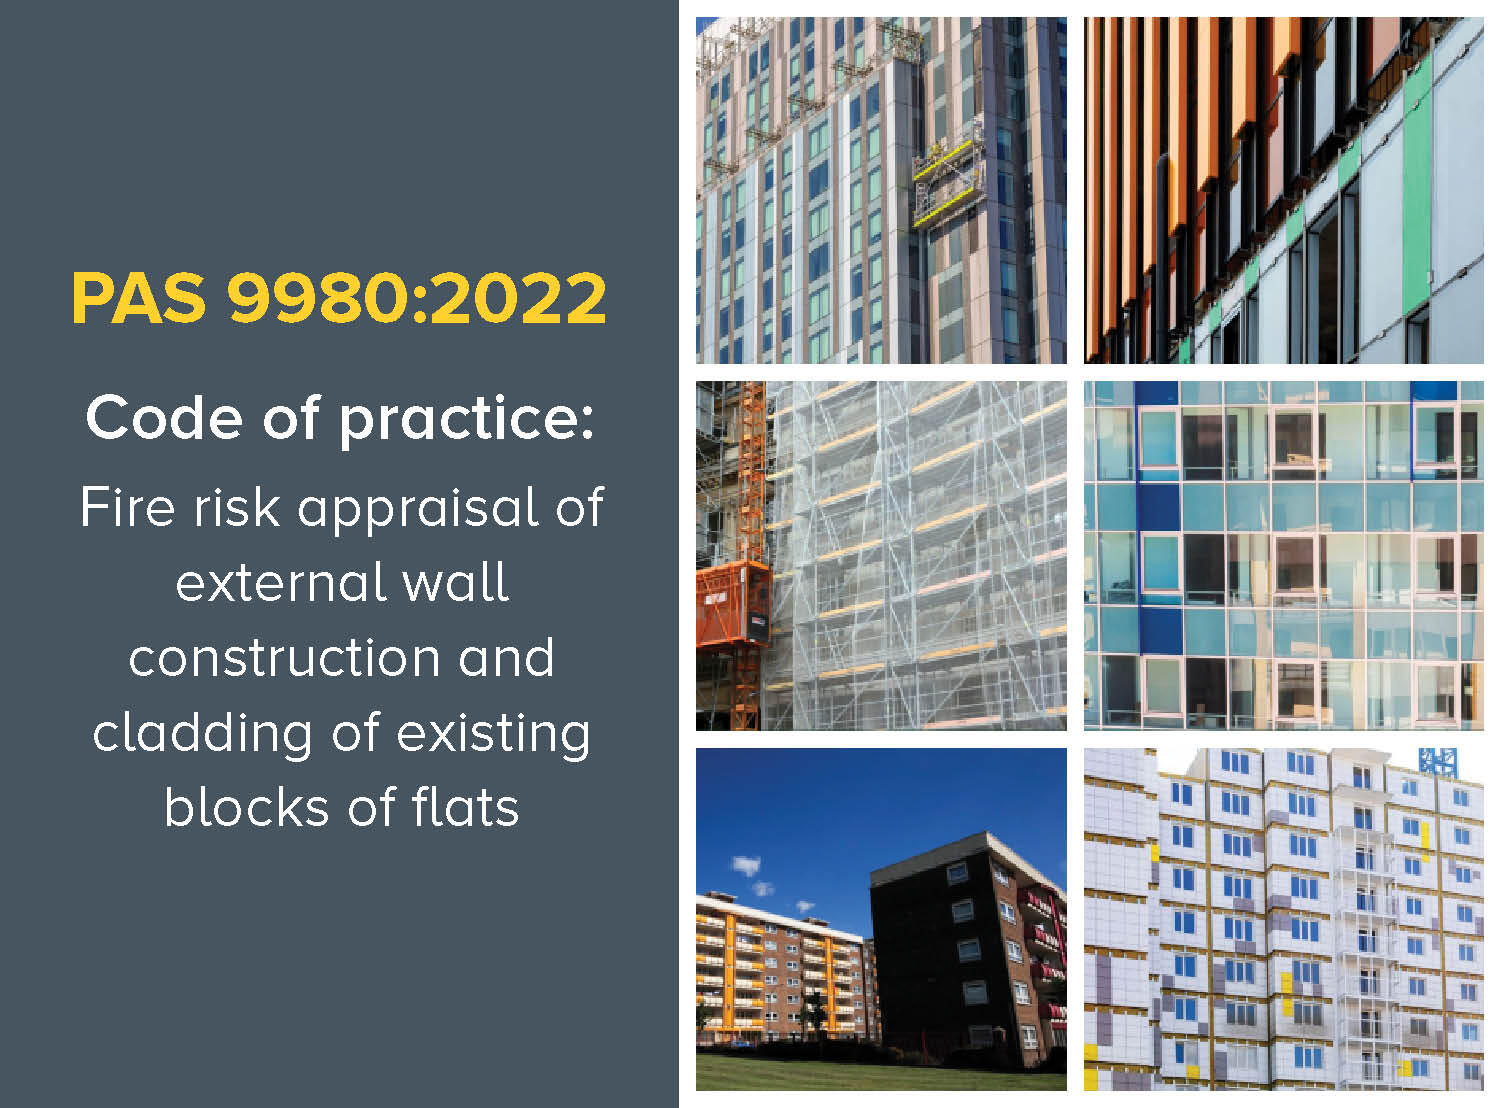 Publication of new code of practice PAS 9980:2022 for external wall fire risk appraisal 